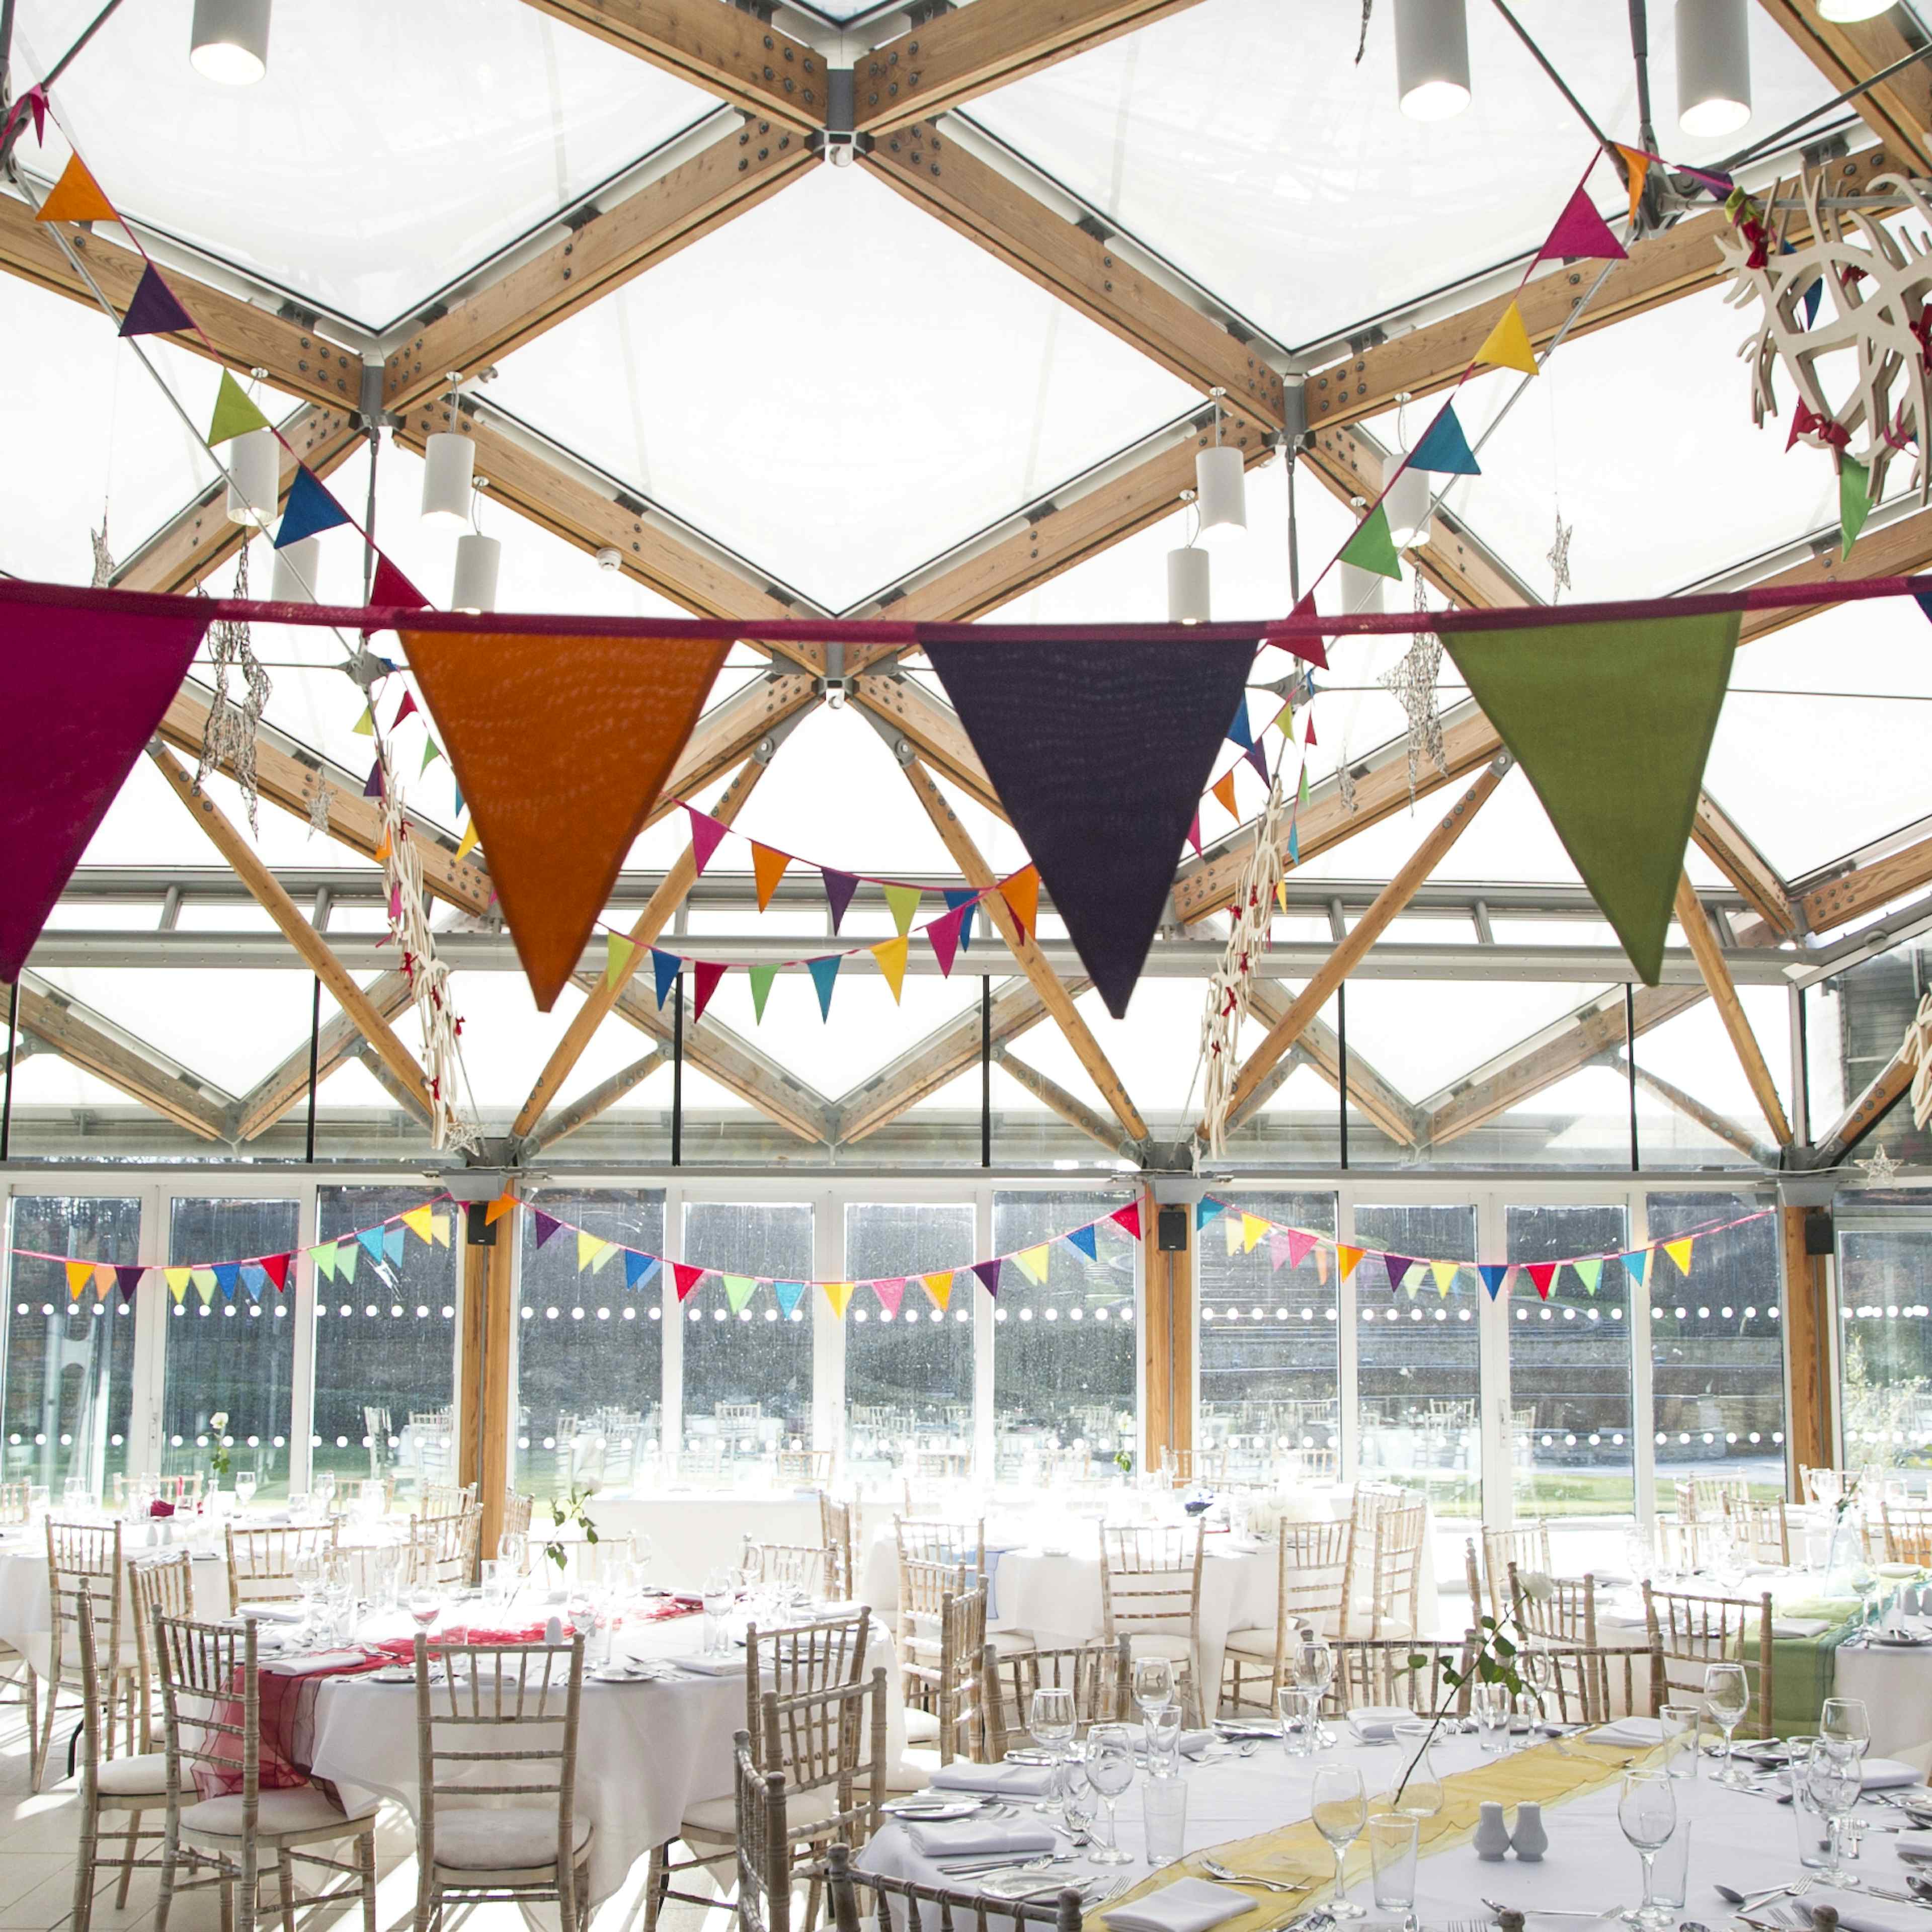 The Pavilion at The Alnwick Garden  - The Pavilion Room image 2